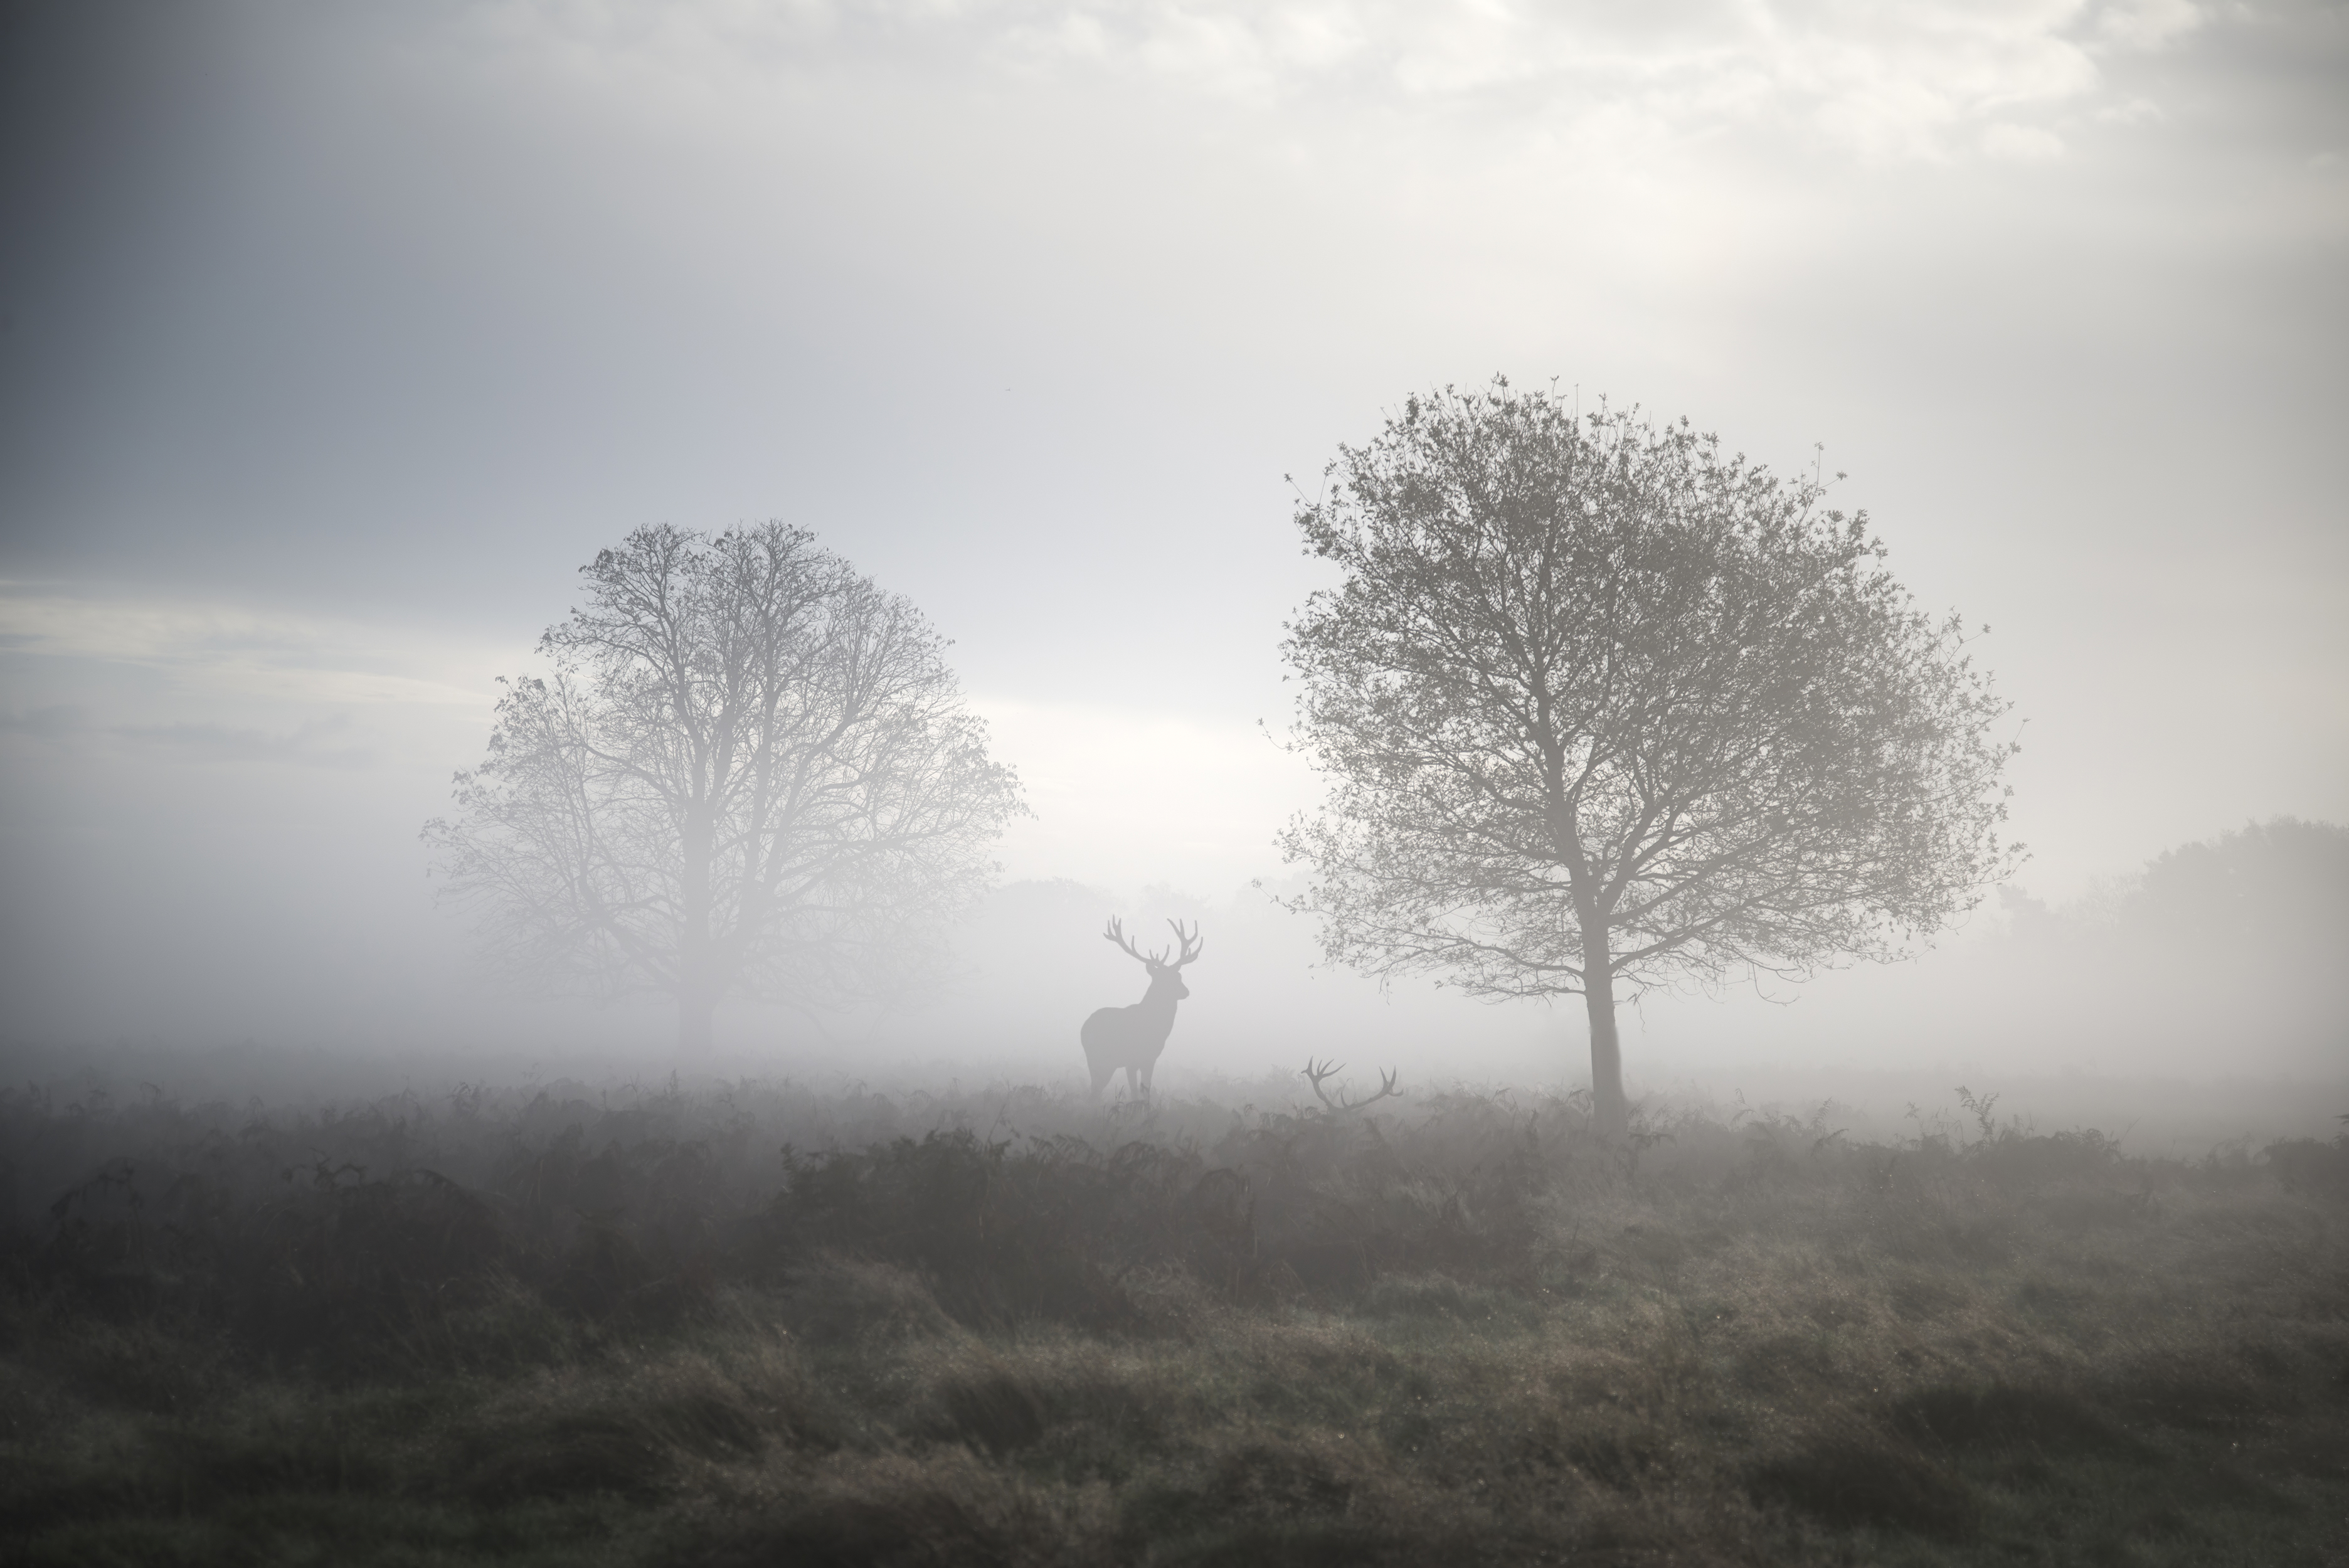 Red deer stag in atmospheric foggy Autumn landscape